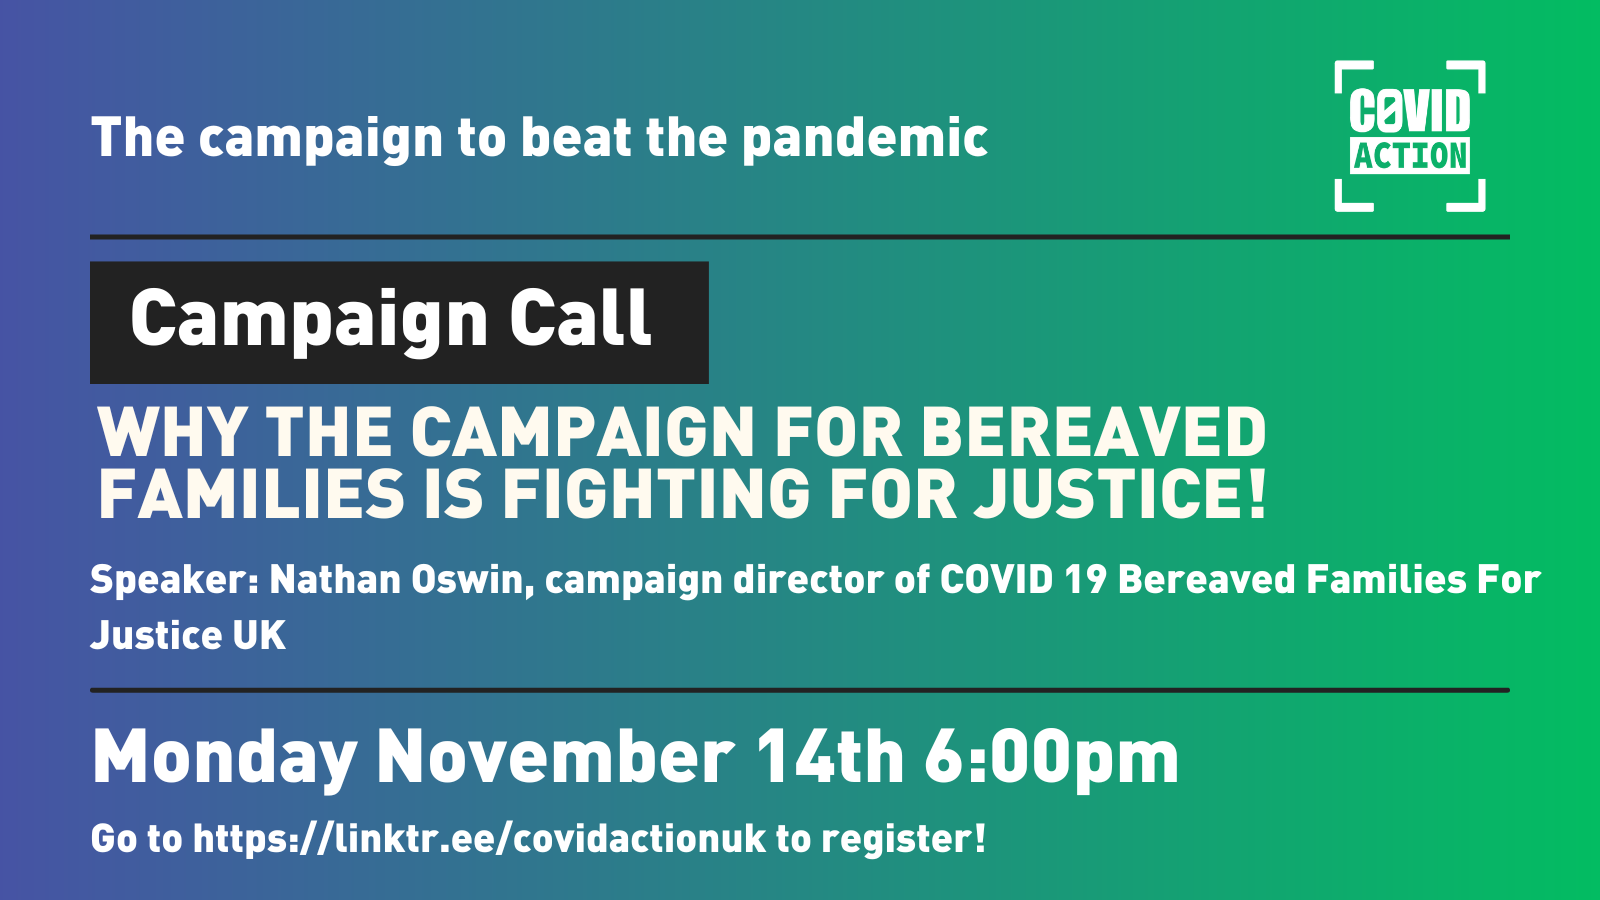 A banner image for the event Covid Action is promoting in this post. Text reads "Campaign Call: Why the Campaign for Bereaved Families is Fighting For Justice!" followed by "Speaker: Nathan Oswin, campaign director of COVID 19 Bereaved Families For Justice UK" and then the date - Monday November 14th - and time - 6:00pm - and the link - https://linktr.ee/covidactionuk, all on a gradient background going from blue to green.